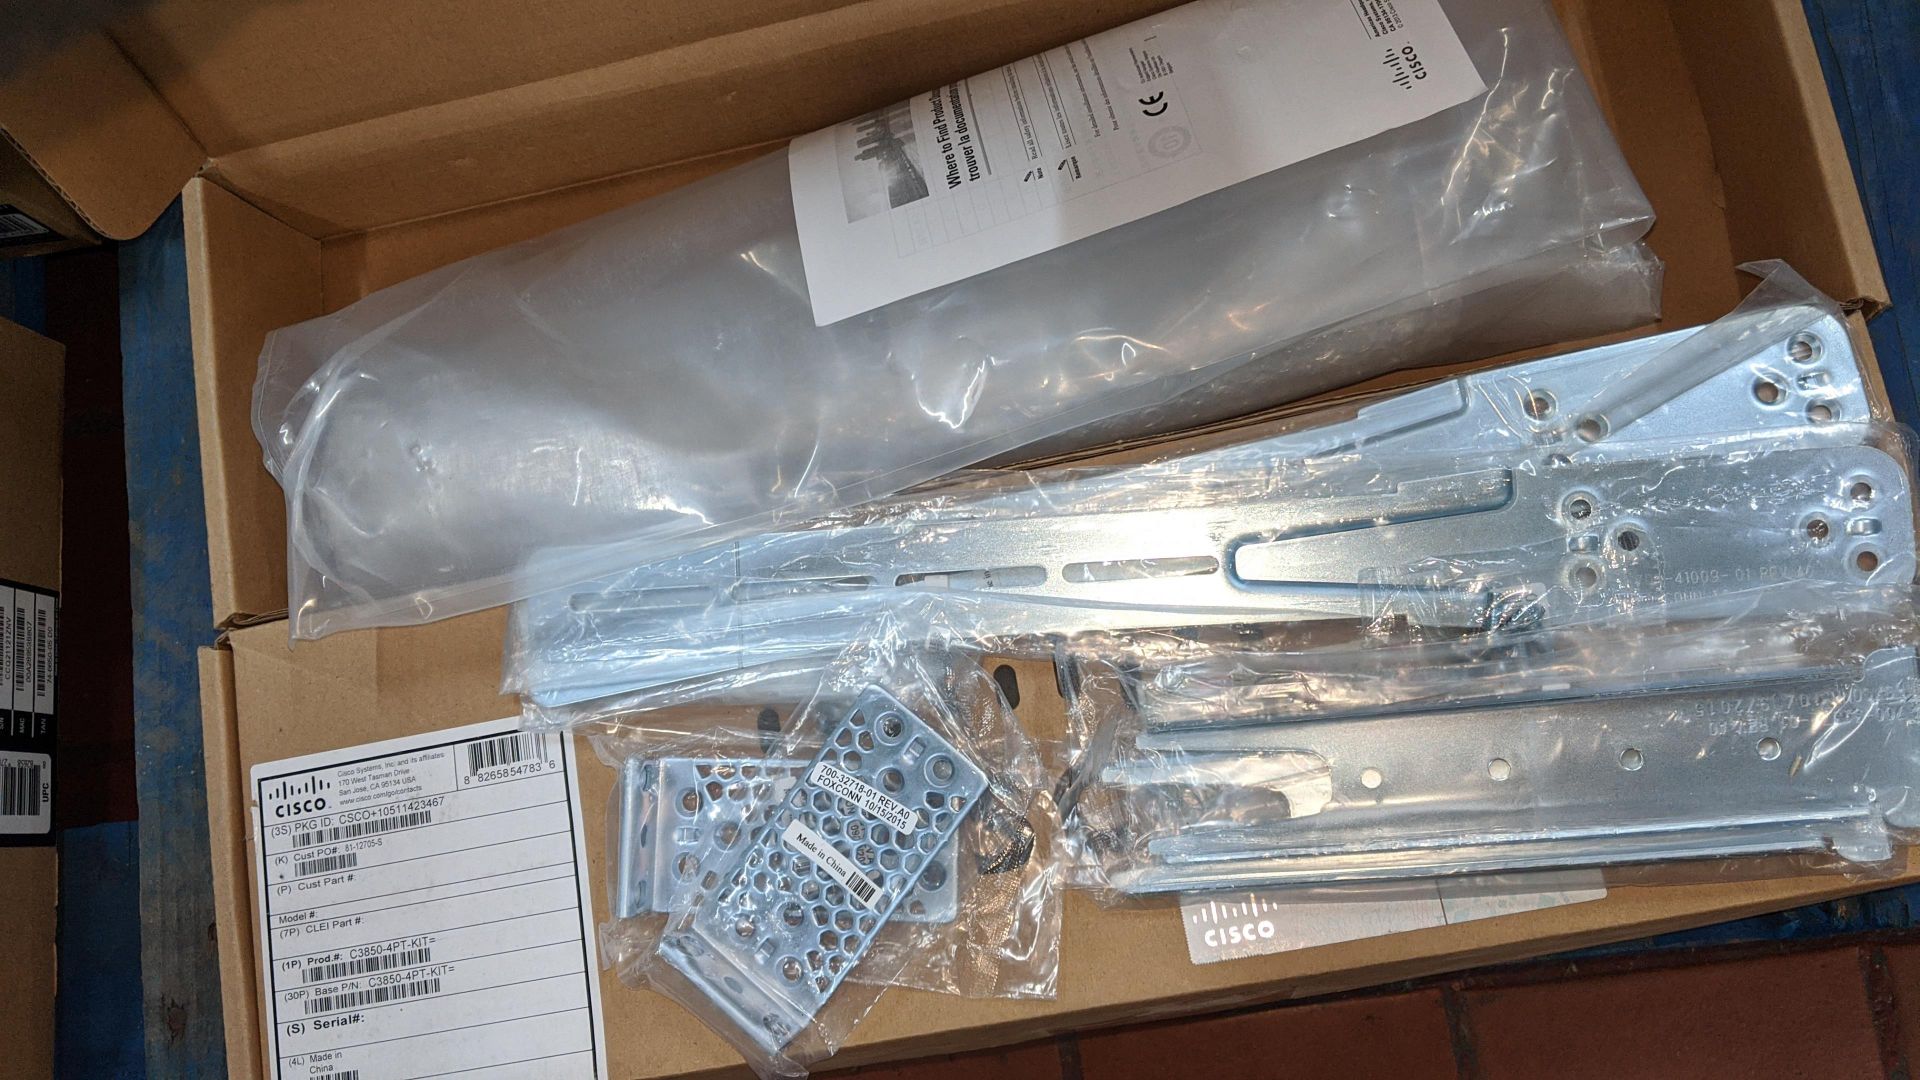 2 off Cisco bracket/mounting kits, product code C3850-4PT-KIT. This is one of a large number of lots - Image 5 of 5